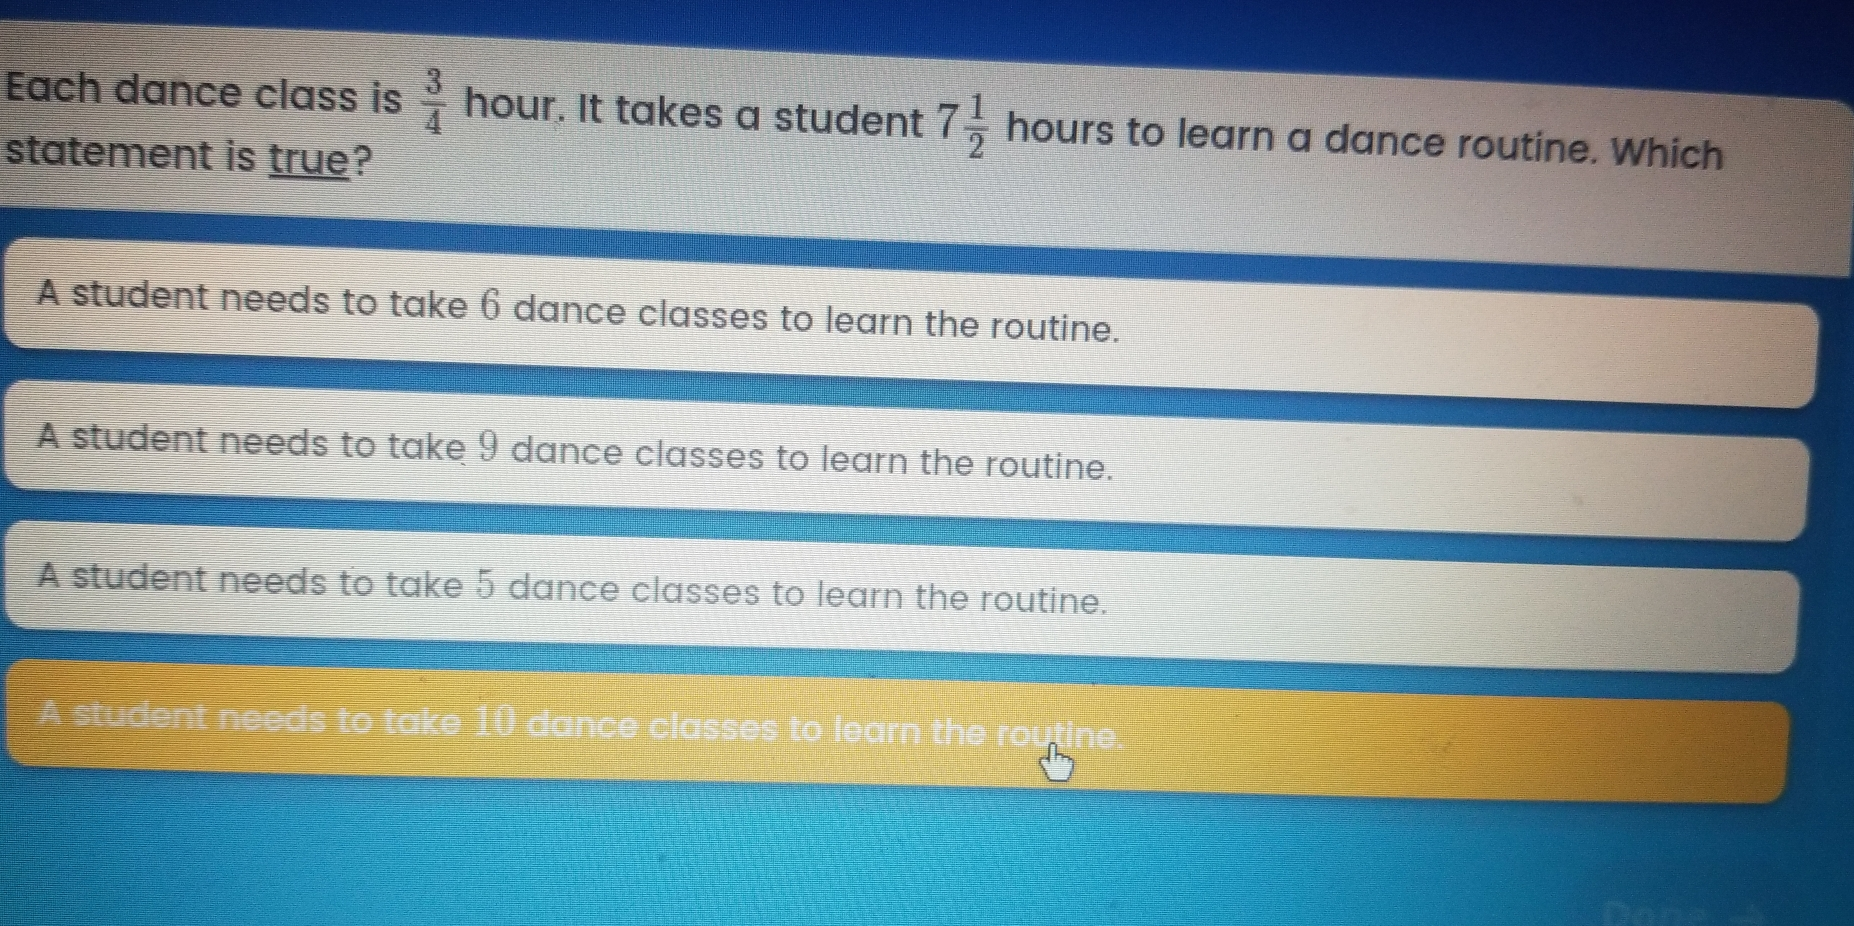 Each dance class is 3/4 hour. It takes a student 7 1/2 hours to learn a dance routine. Which statement is true? A student needs to take 6 dance classes to learn the routine. A student needs to take 9 dance classes to learn the routine. A student needs to take 5 dance classes to learn the routine. A student needs to take dance classes to learn merc